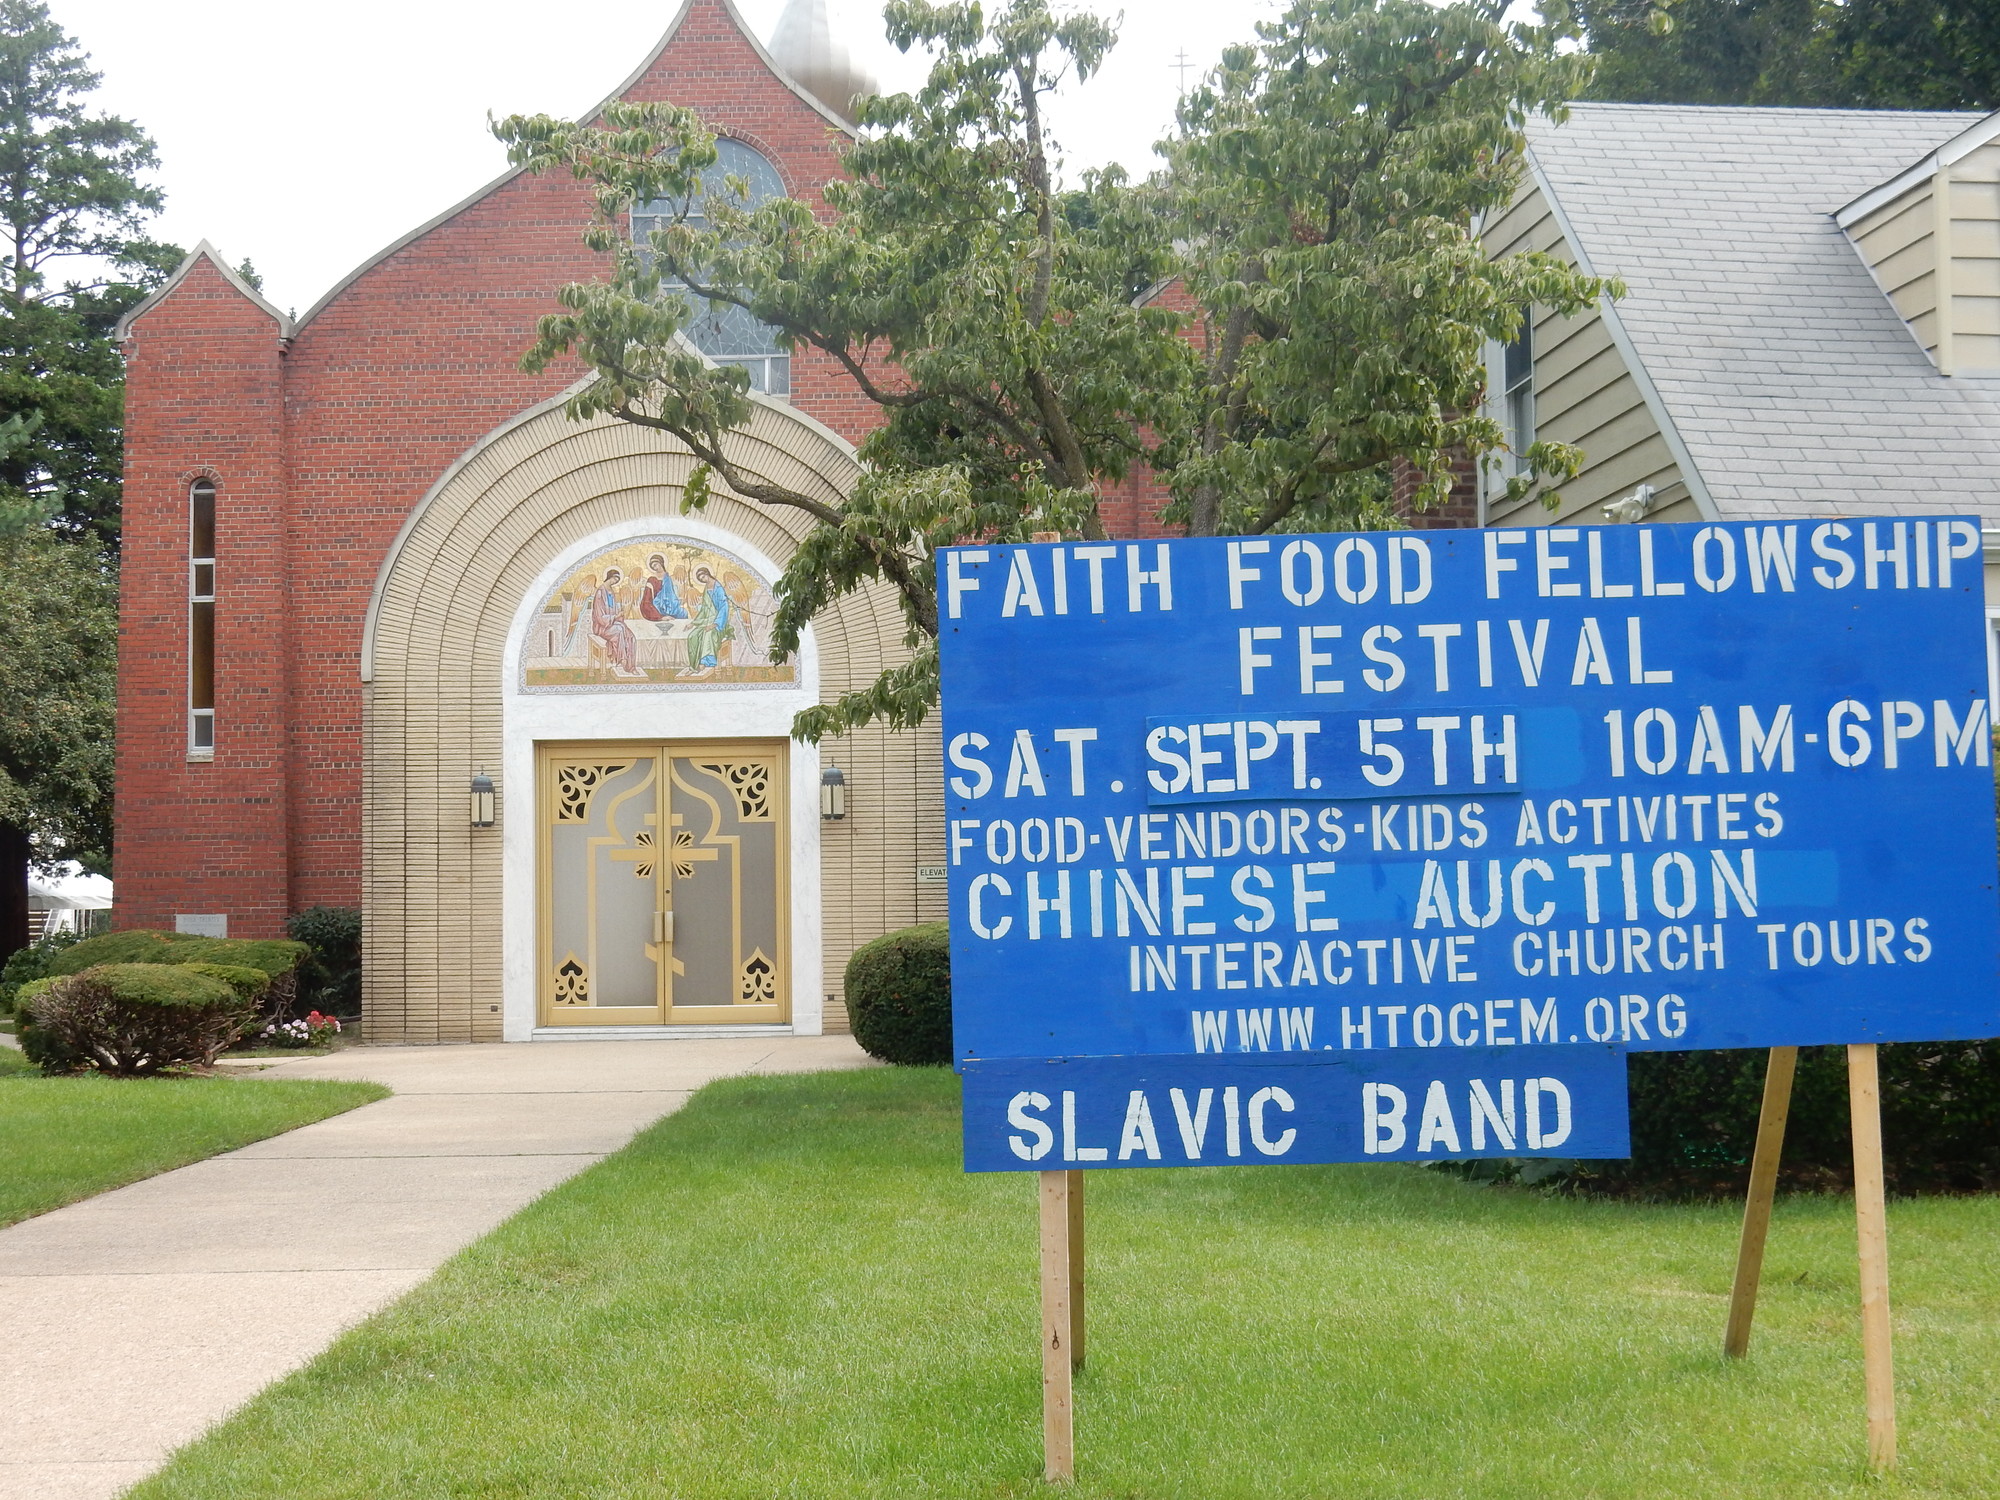 The fifth annual Faith, Food and Fellowship Festival welcomed more than 900 people last year. Church officials hope this year’s attendance will top 1,000 this Saturday.